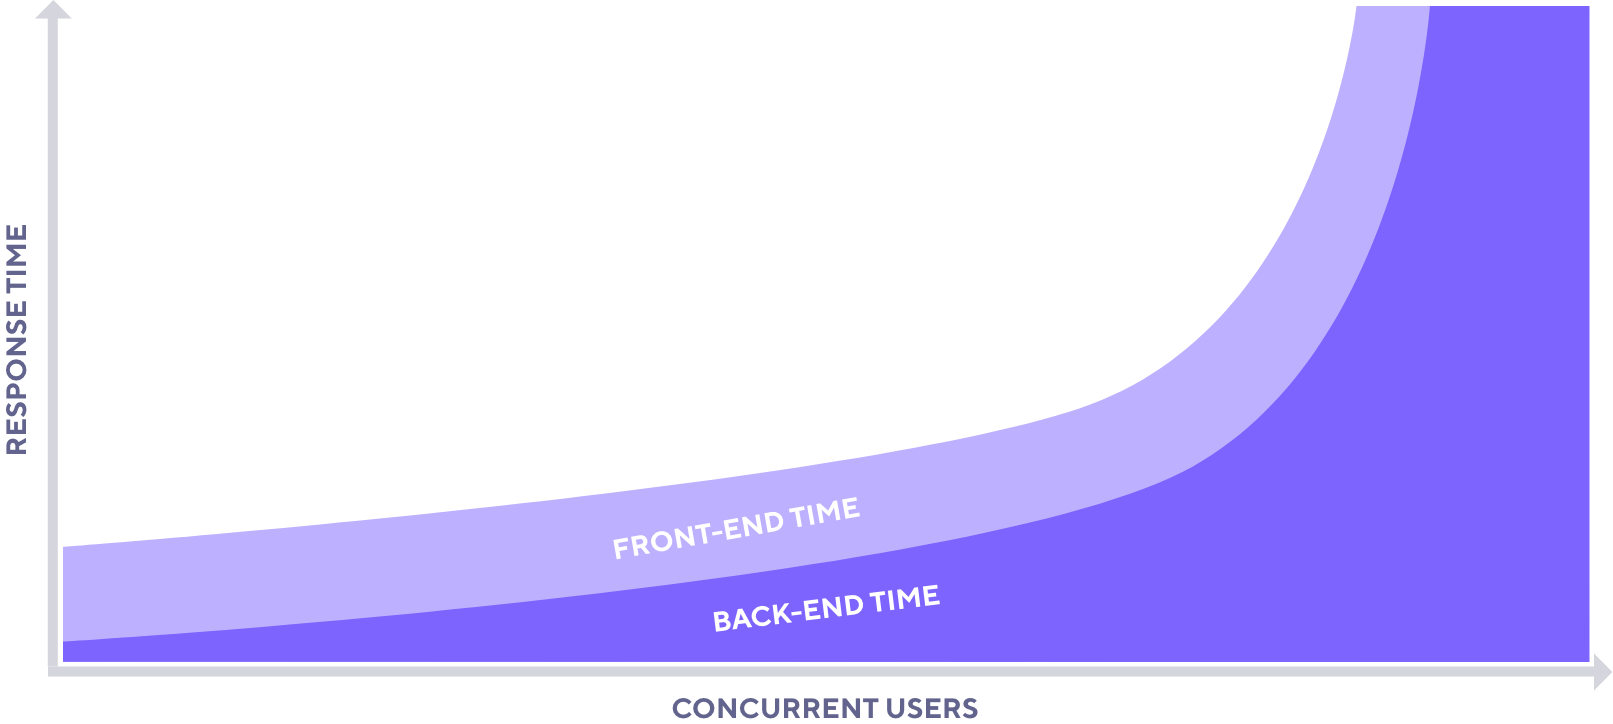 graph plotting response time over the number of concurrent users for front-end and back-end